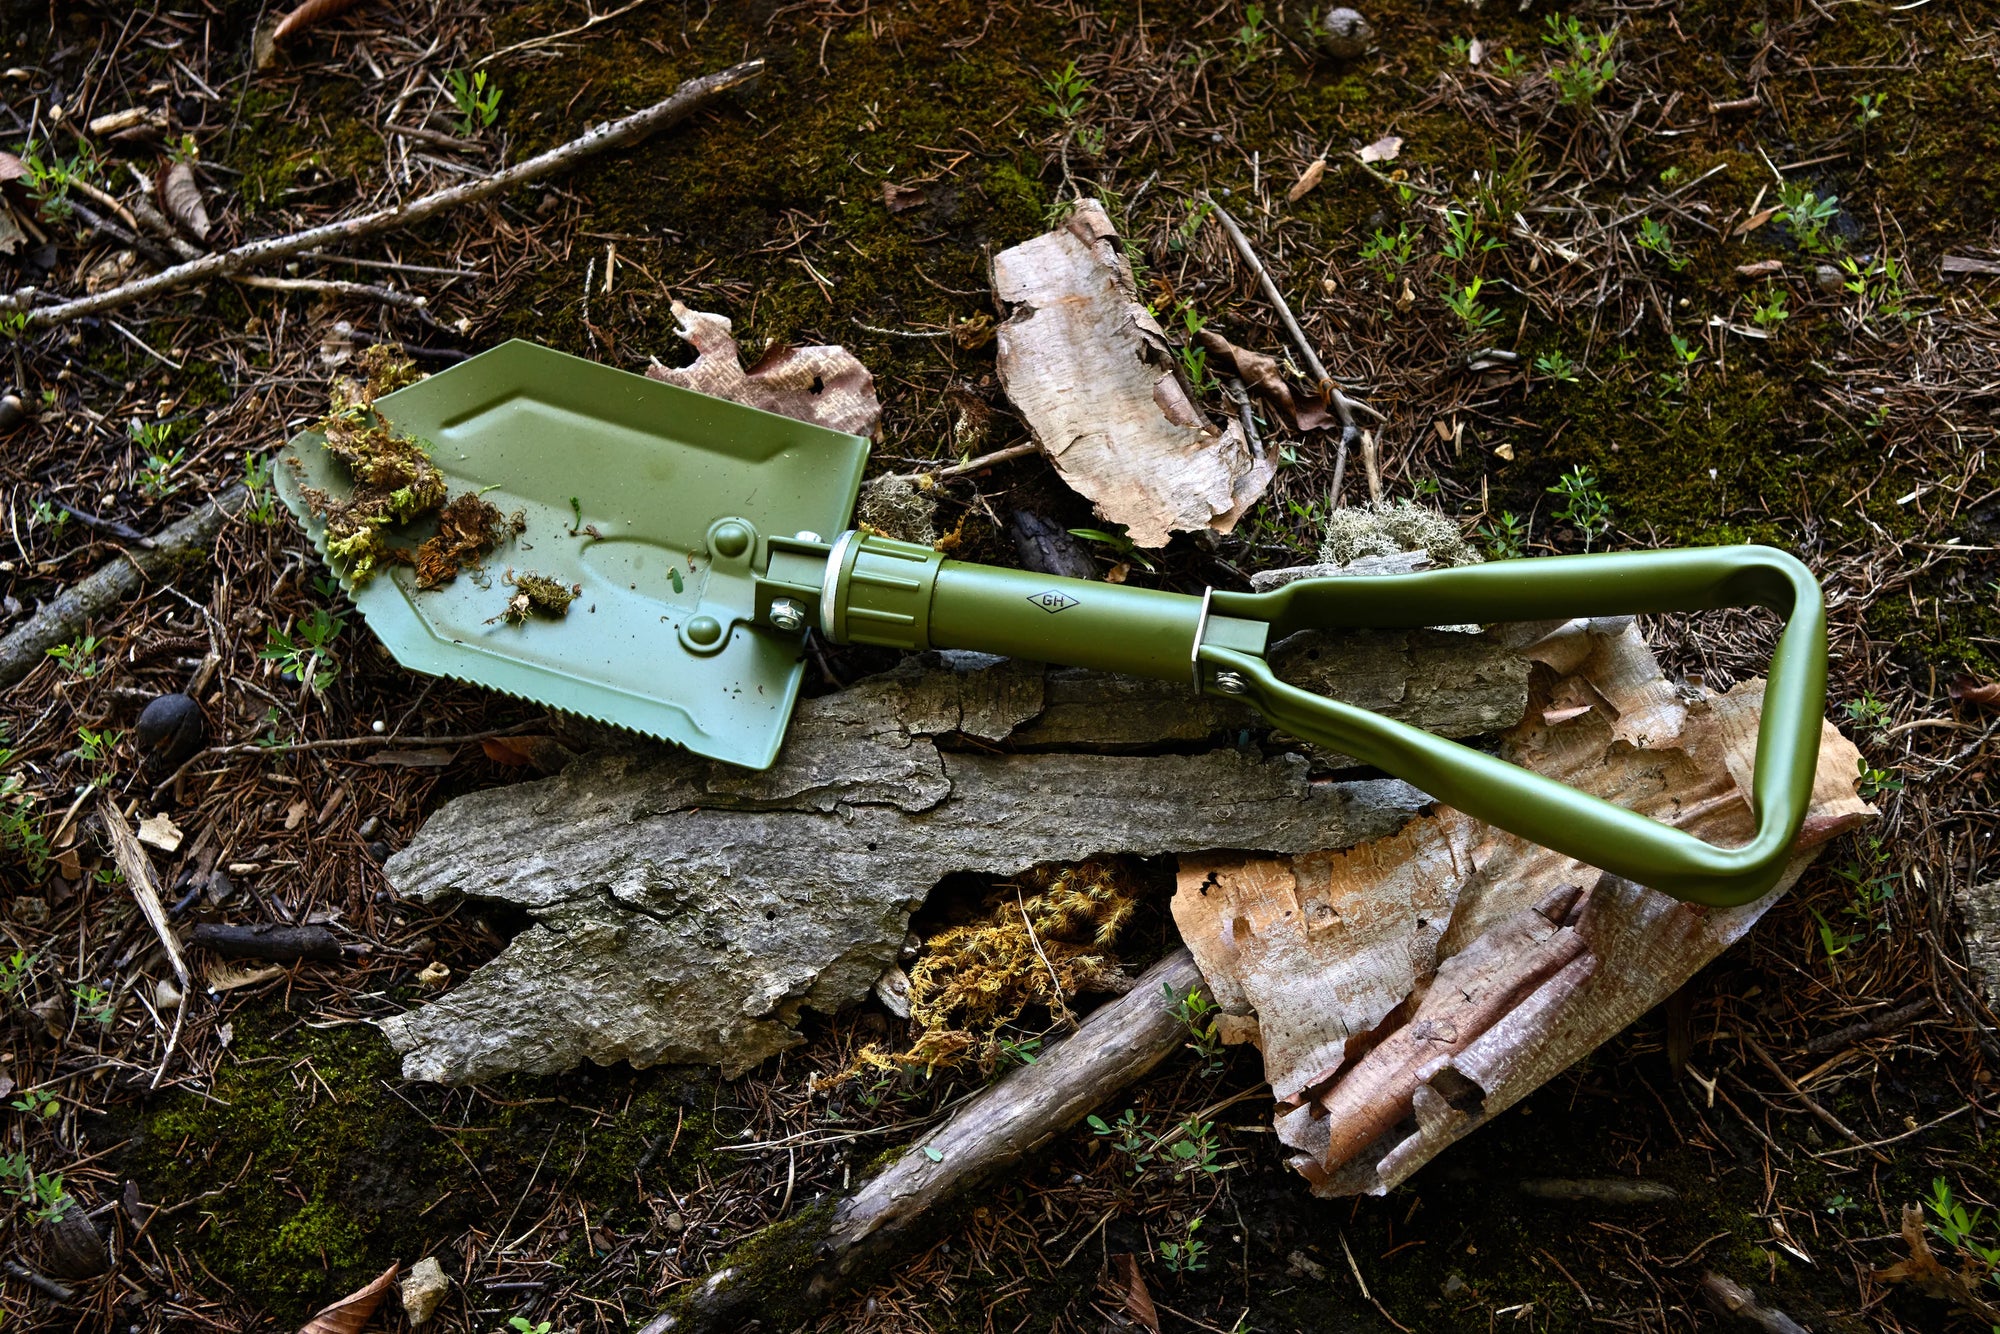 The Folding Shovel - The Ultimate Camping Tool You Never Knew You Needed